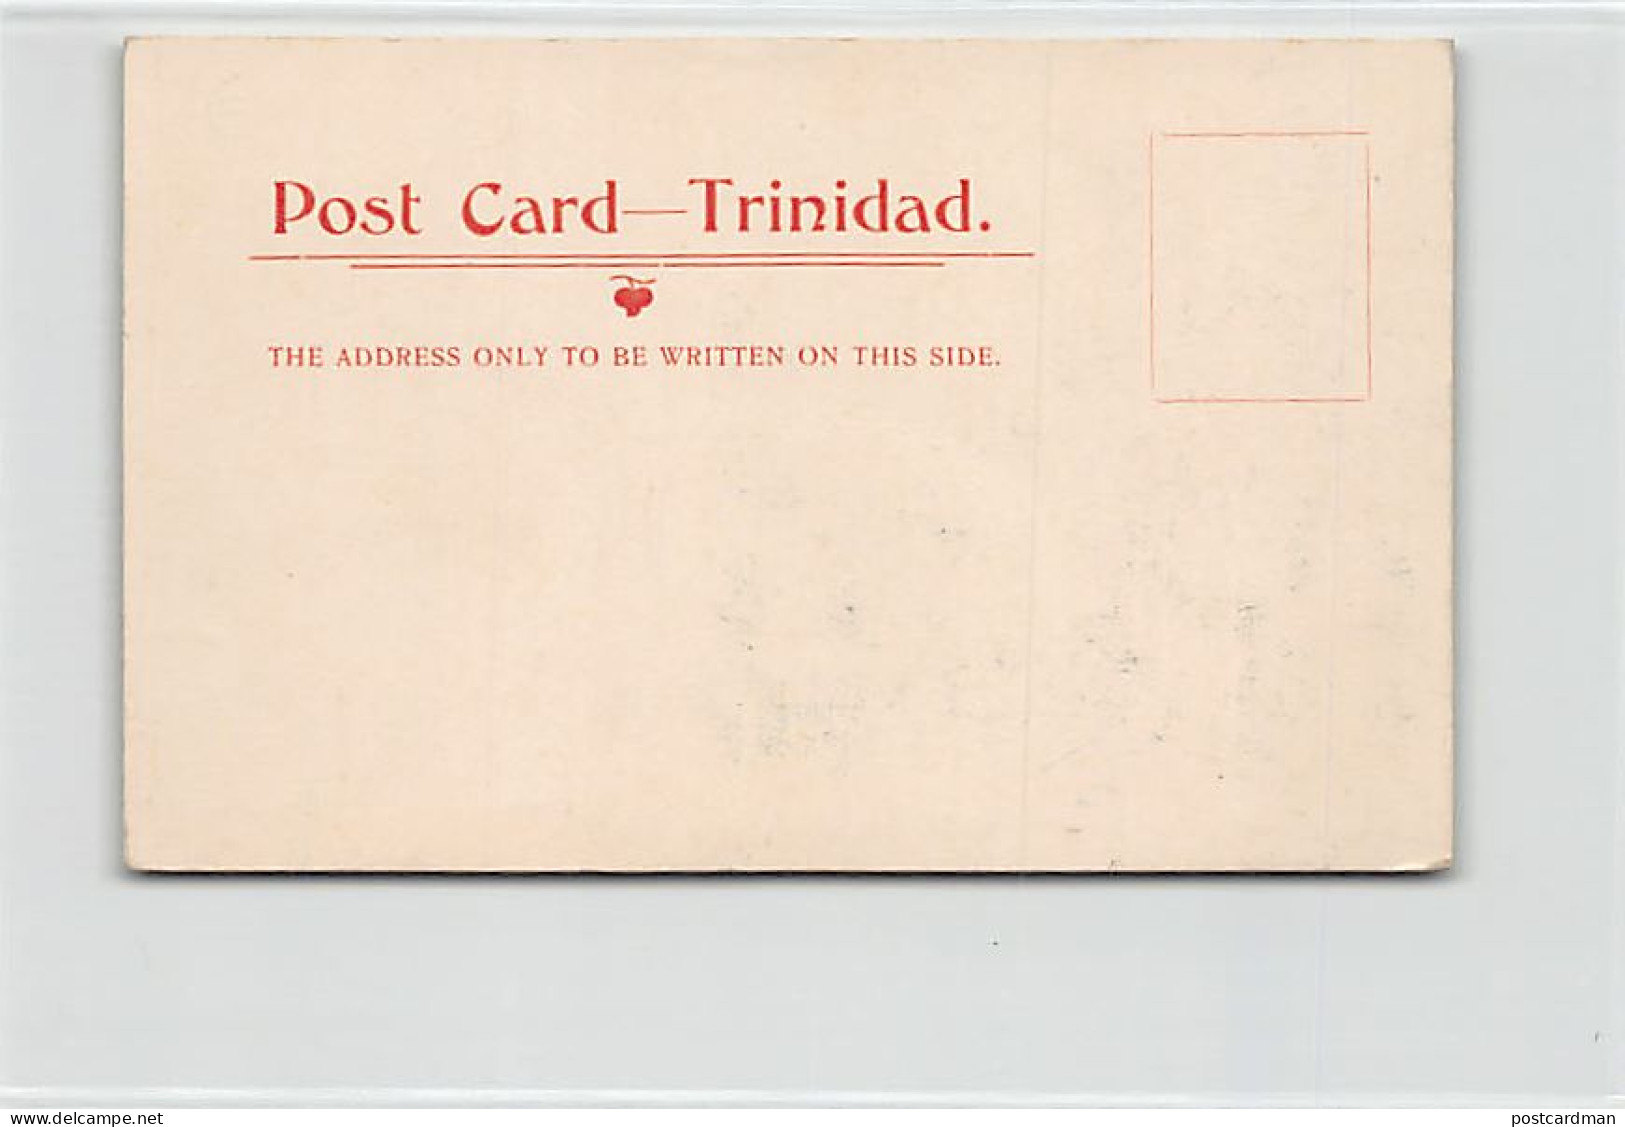 Trinidad - PORT OF SPAIN - Brunswick Square - SMALL SIZE Early Forerunner Postcard - Publ. Unknown  - Trinidad